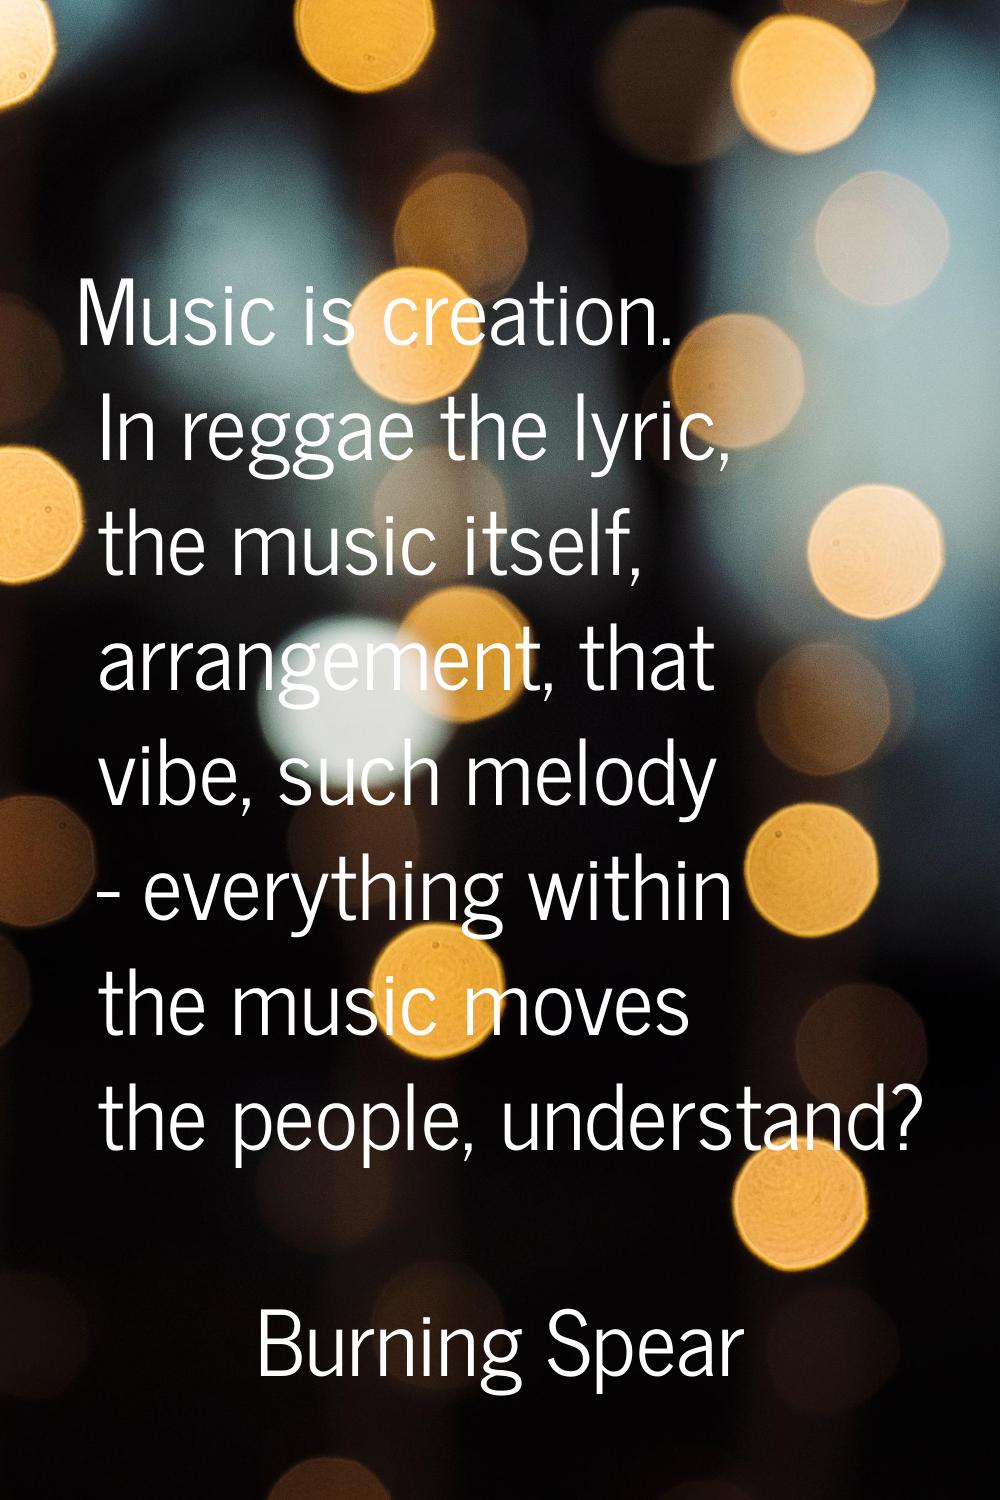 Music is creation. In reggae the lyric, the music itself, arrangement, that vibe, such melody - eve